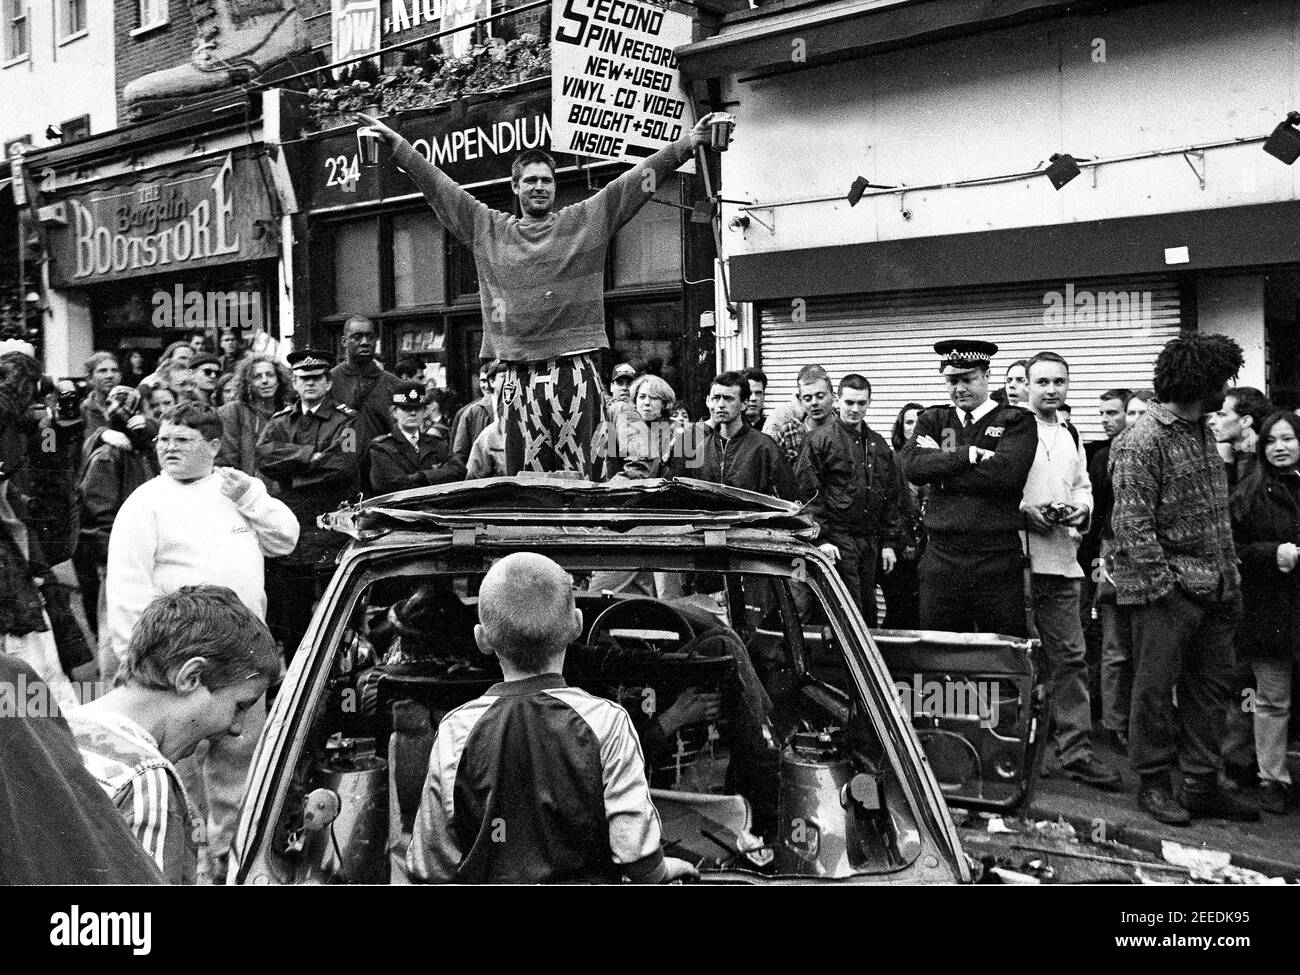 Police officers watching the crowd at the Camden High Street Reclaim The Streets anti car protest, London, 14th May 1995 Stock Photo